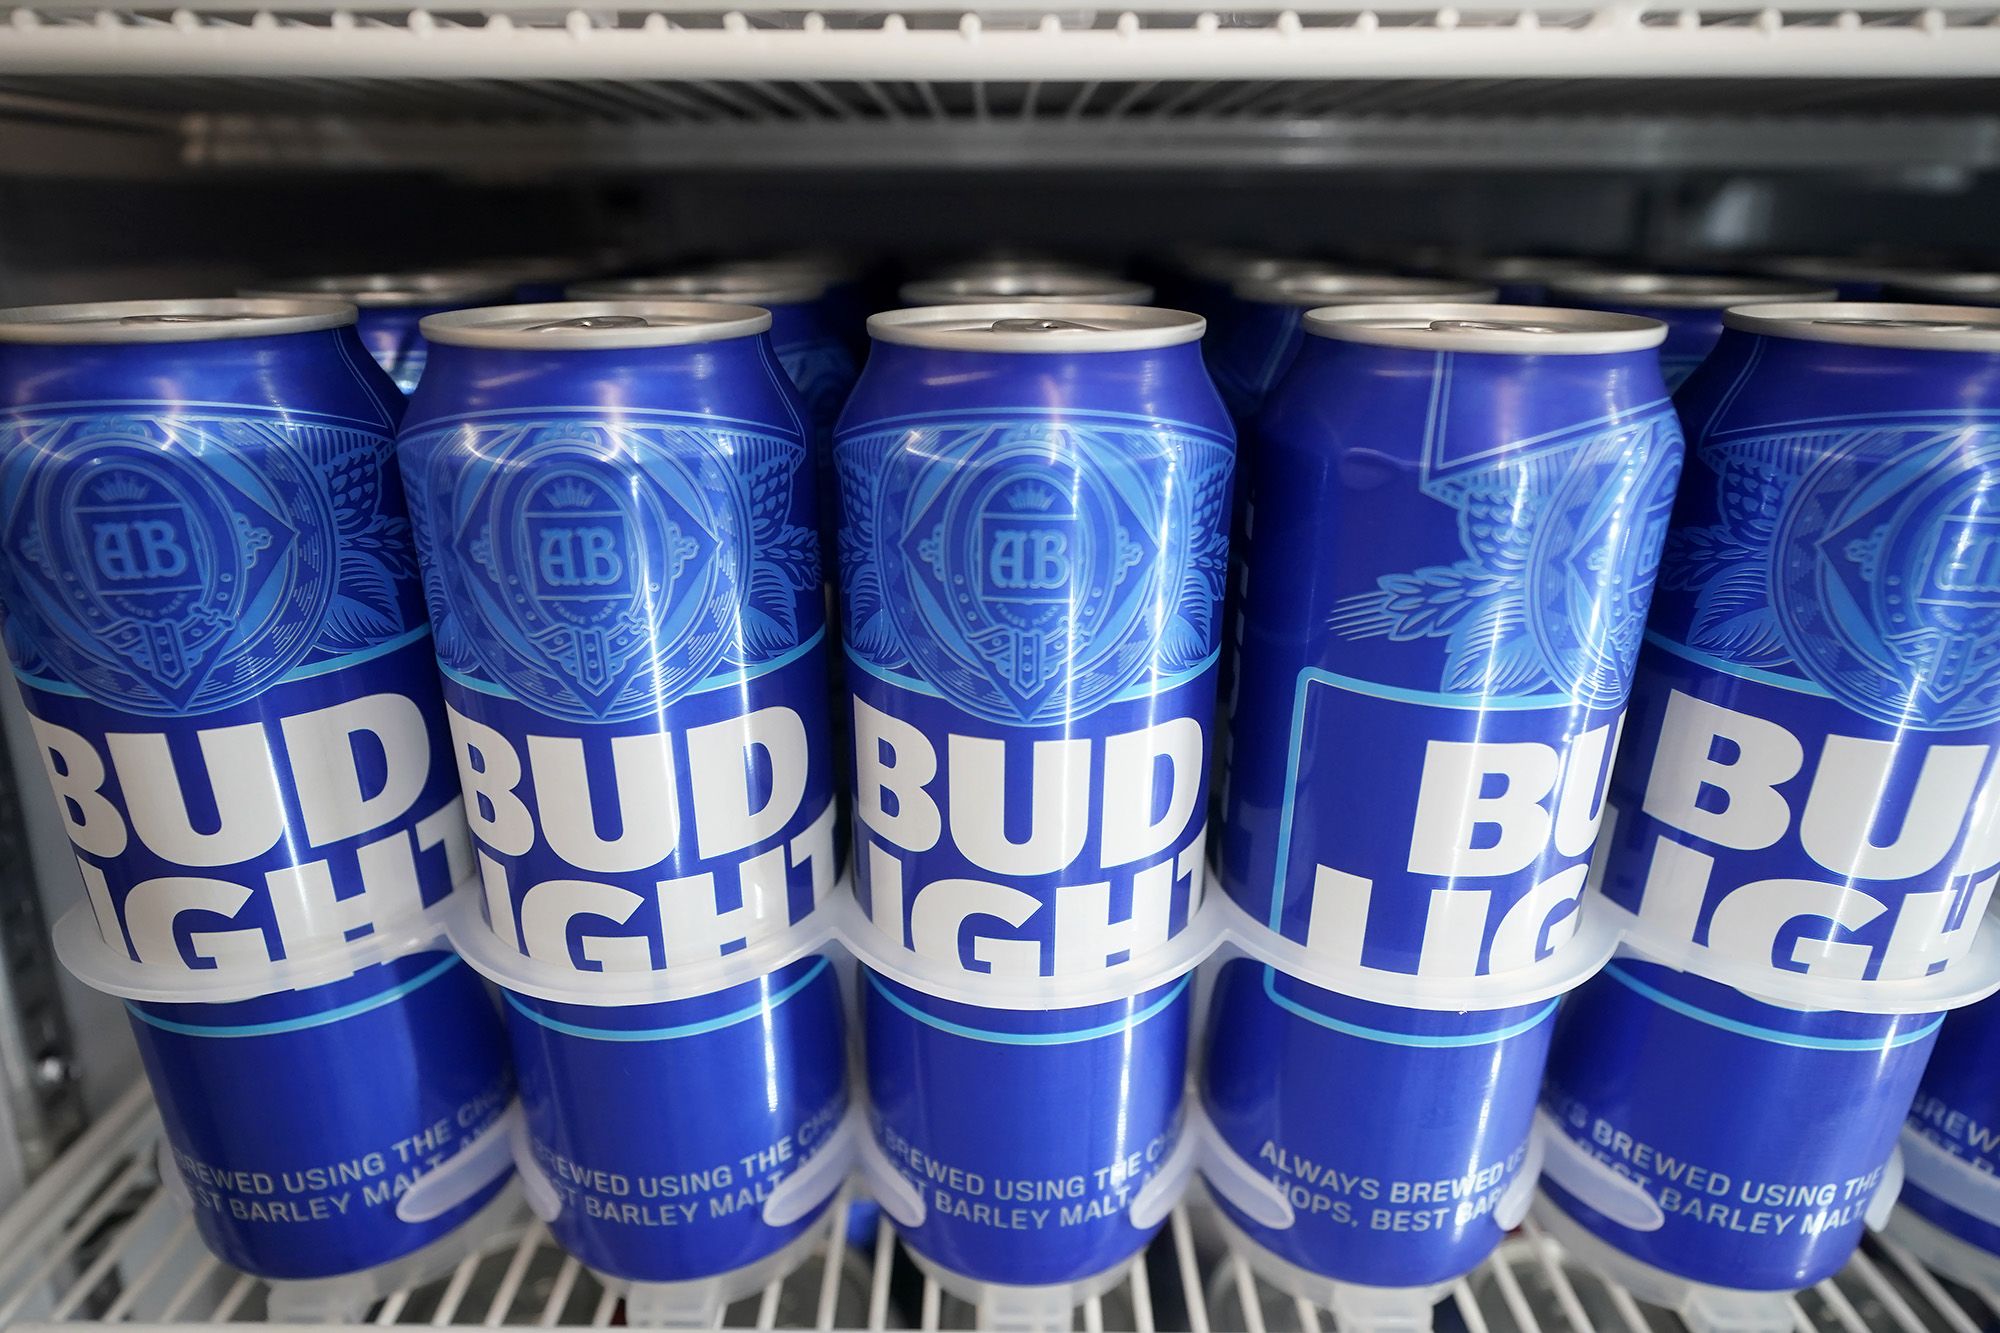 Bud Light sales keep slipping. But it remains America's top